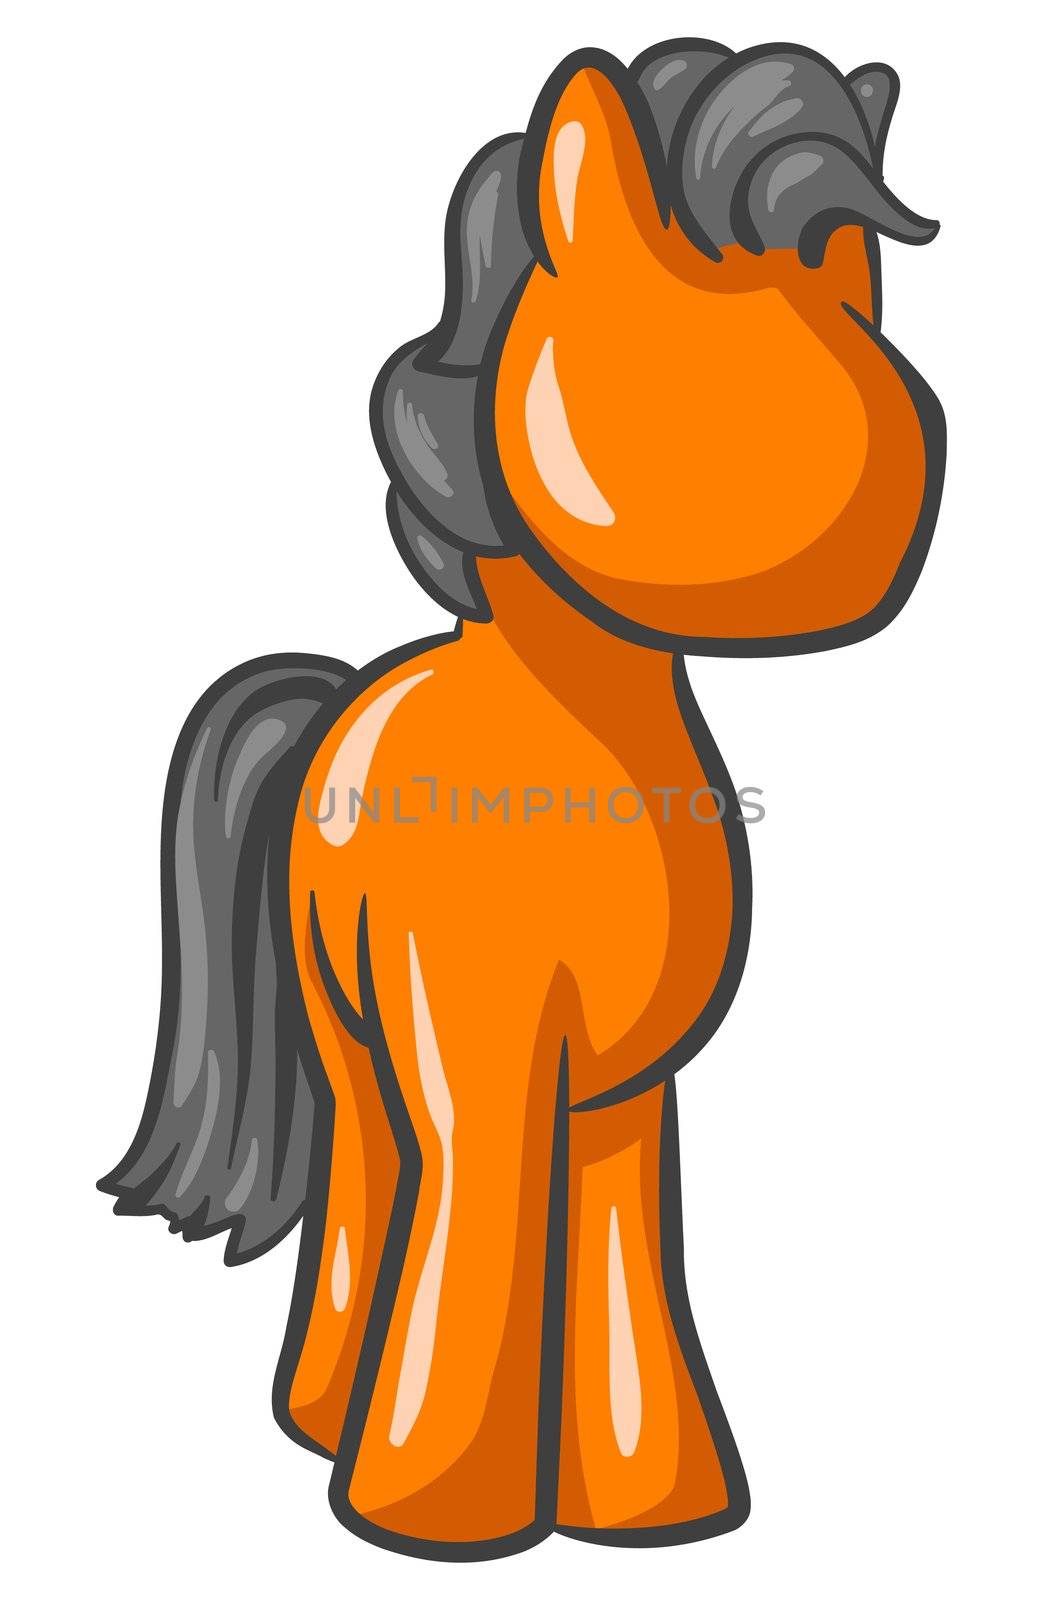 An orange horse, standing up, looking cute, and looking to the right. 